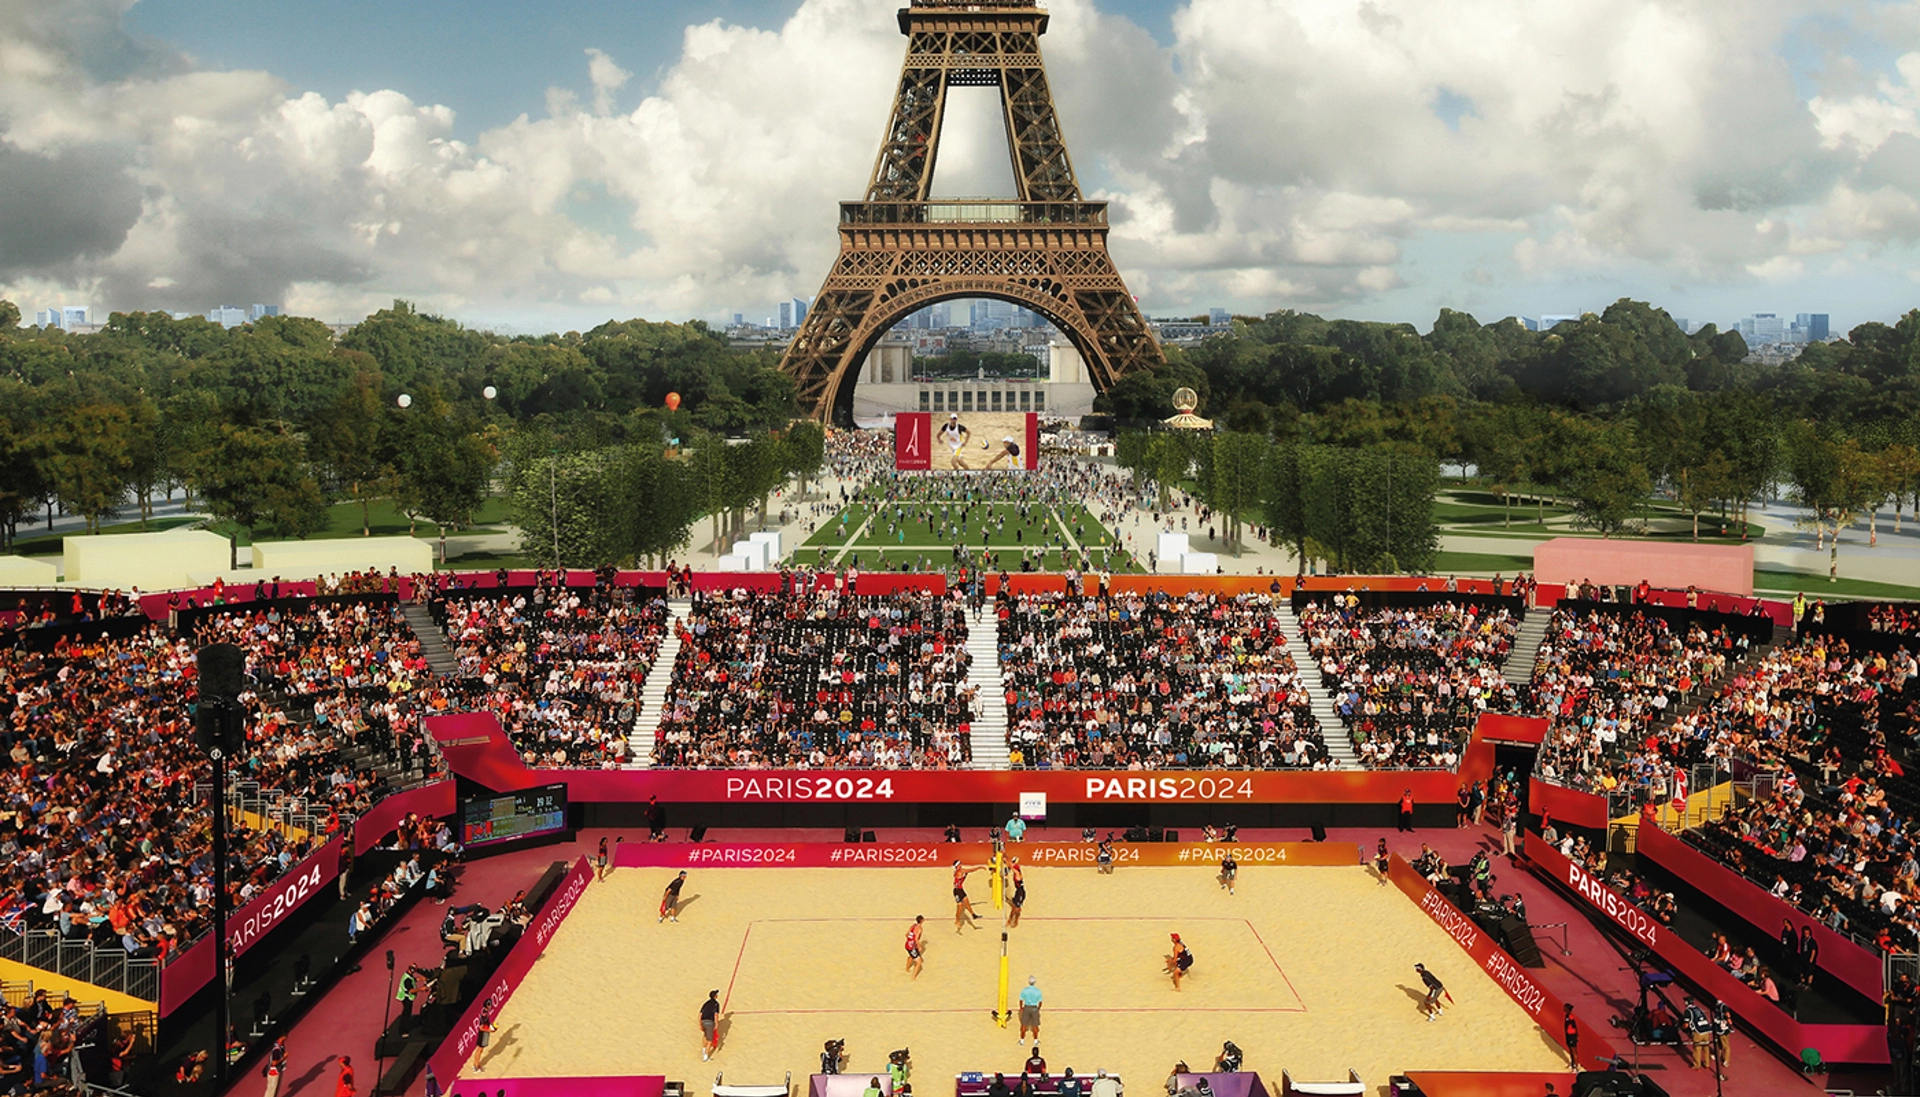  beach volleyball at the Champ de Mars